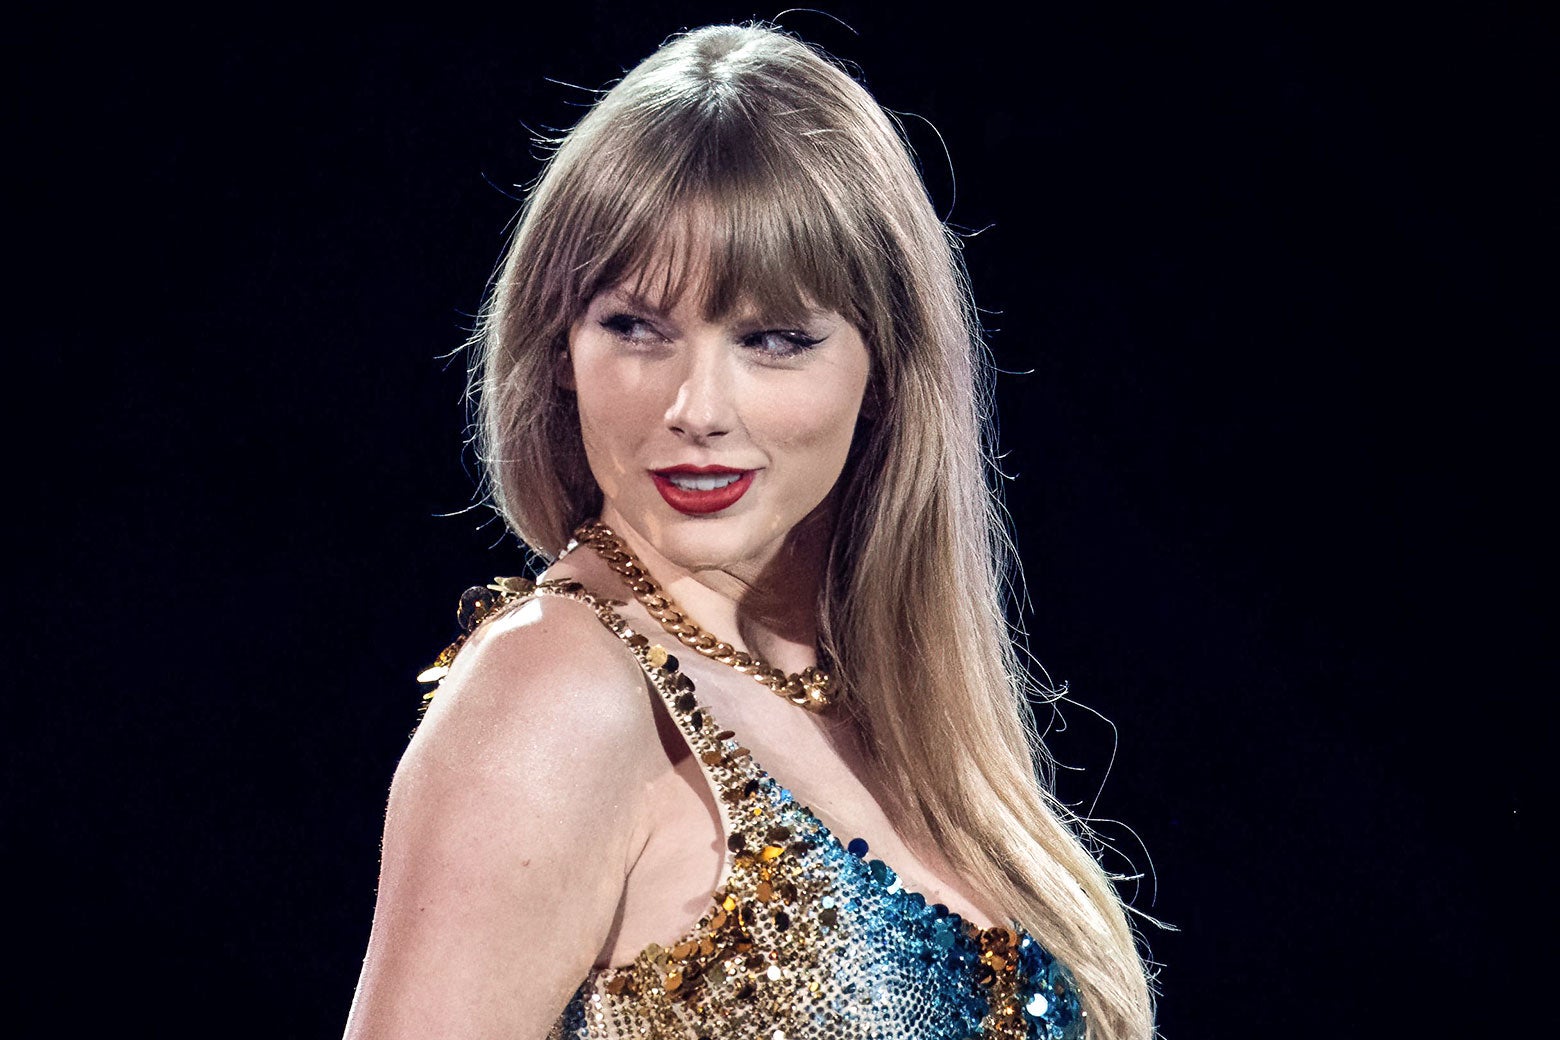 Taylor Swift, blond with bangs and a striking red lip, smiles and performs in a sparkly bodysuit at a concert. 